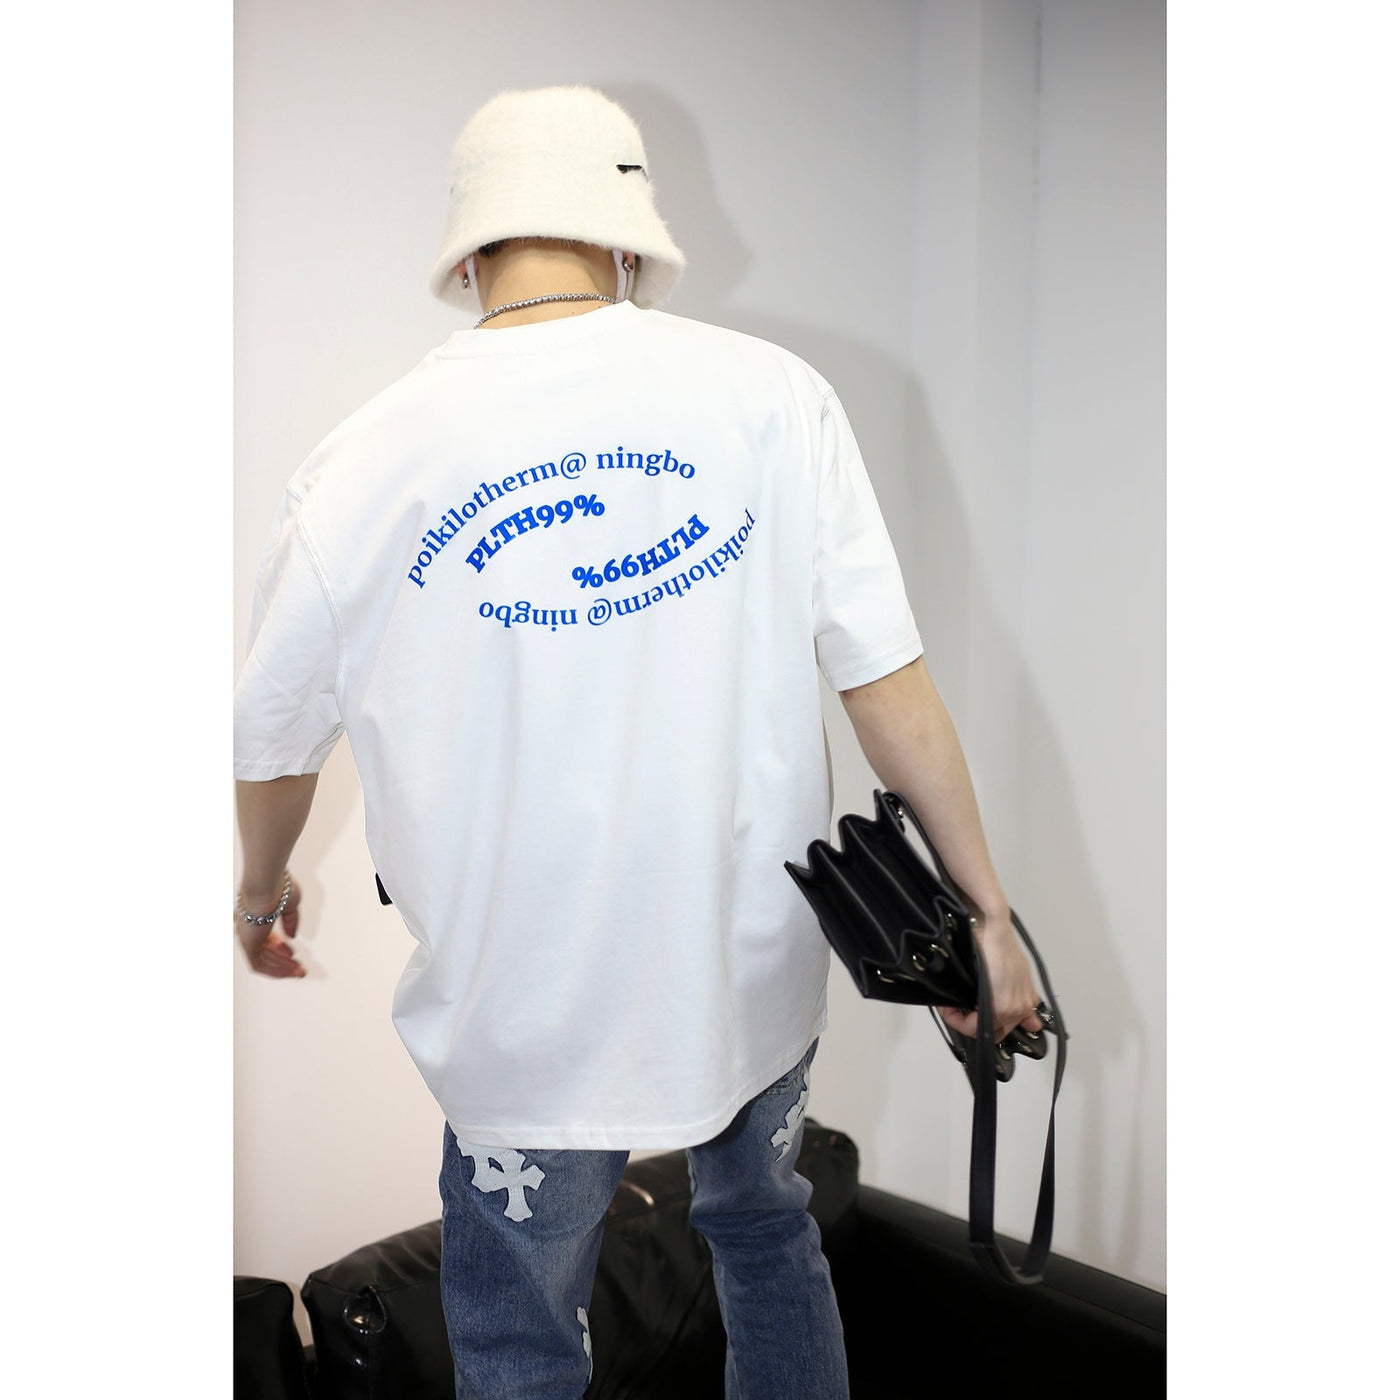 Swirling Letters T-Shirt Korean Street Fashion T-Shirt By Poikilotherm Shop Online at OH Vault